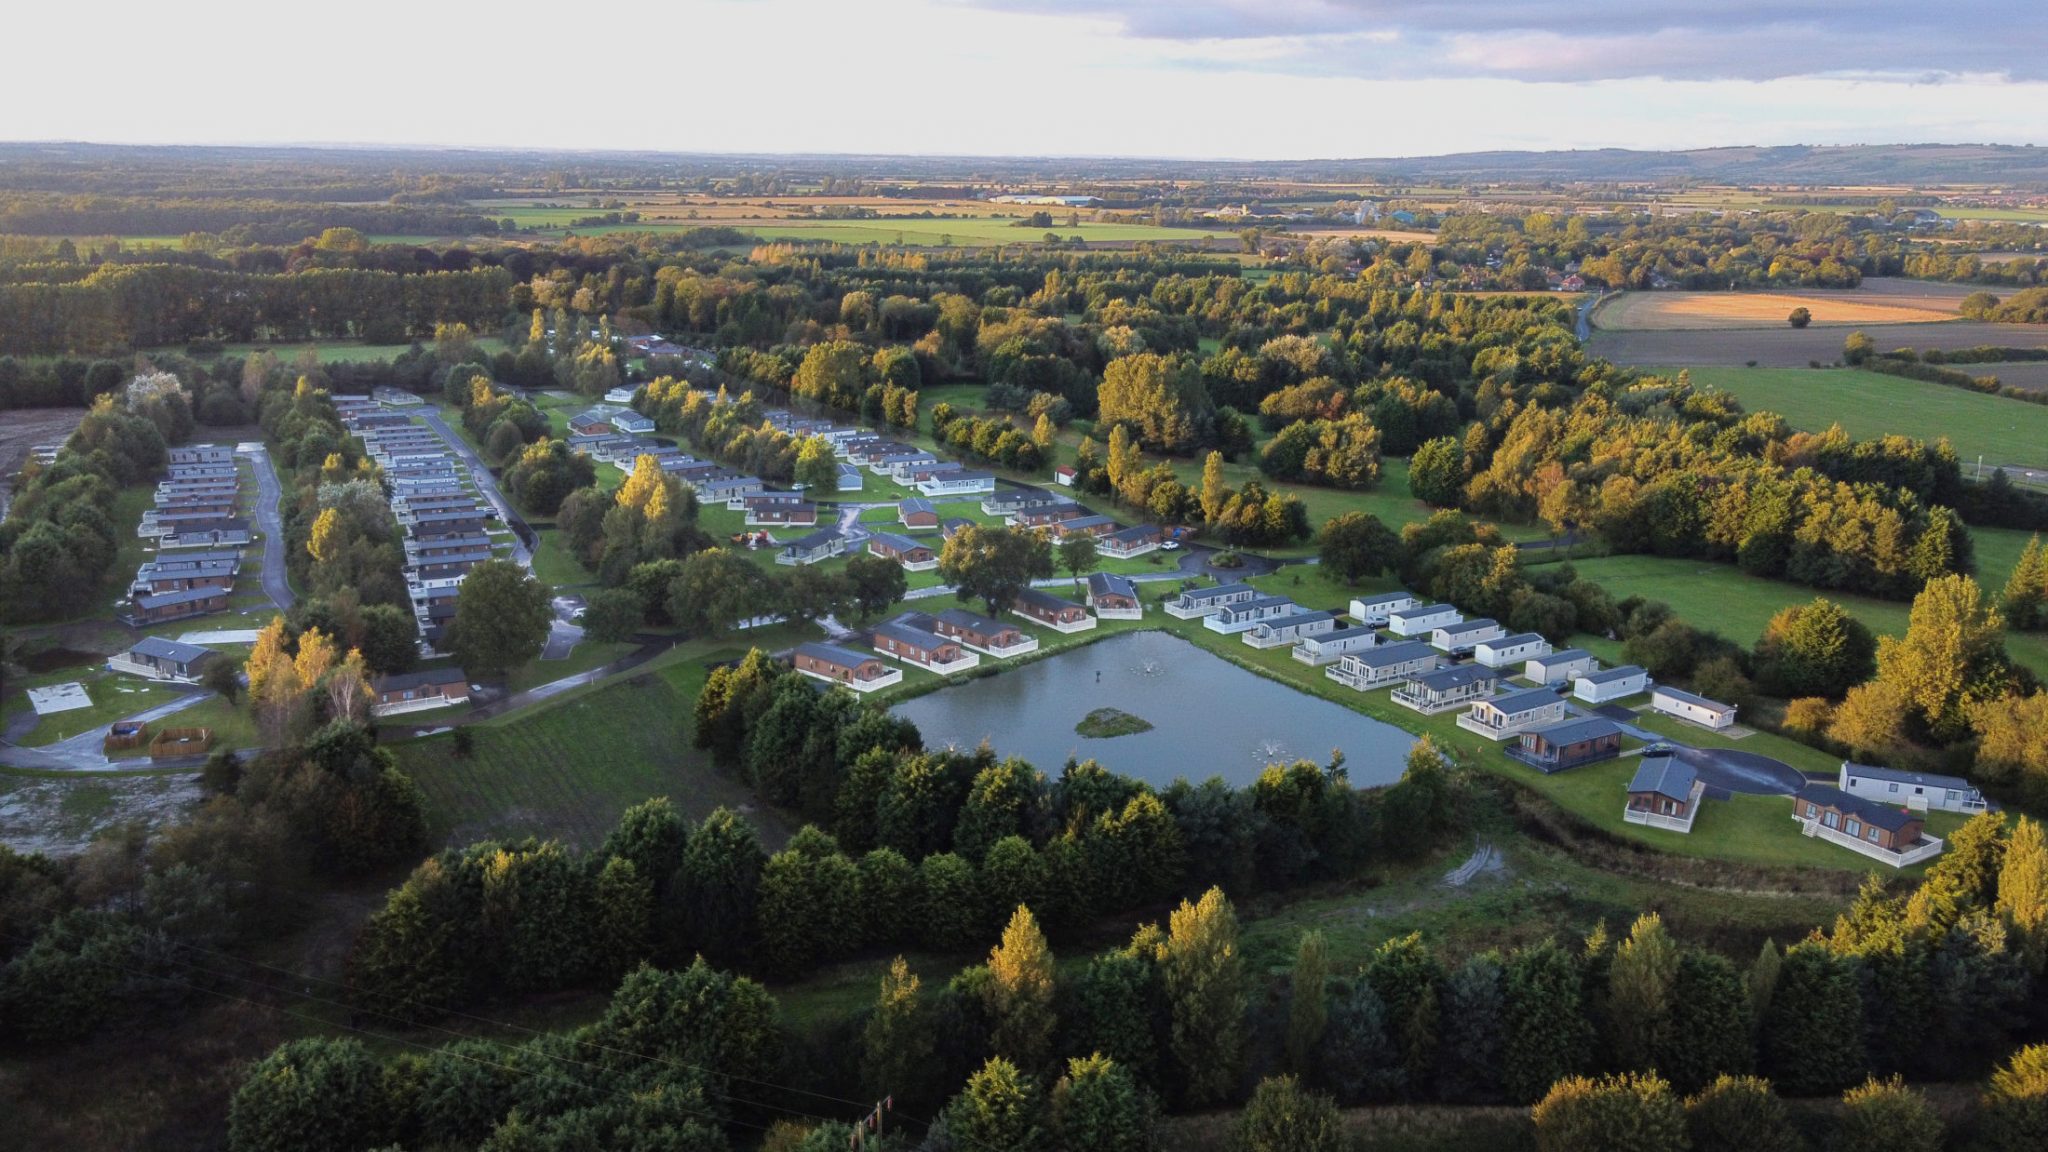 Allerthorpe Golf And Country park area with lodges, caravans and a lake, seen from above